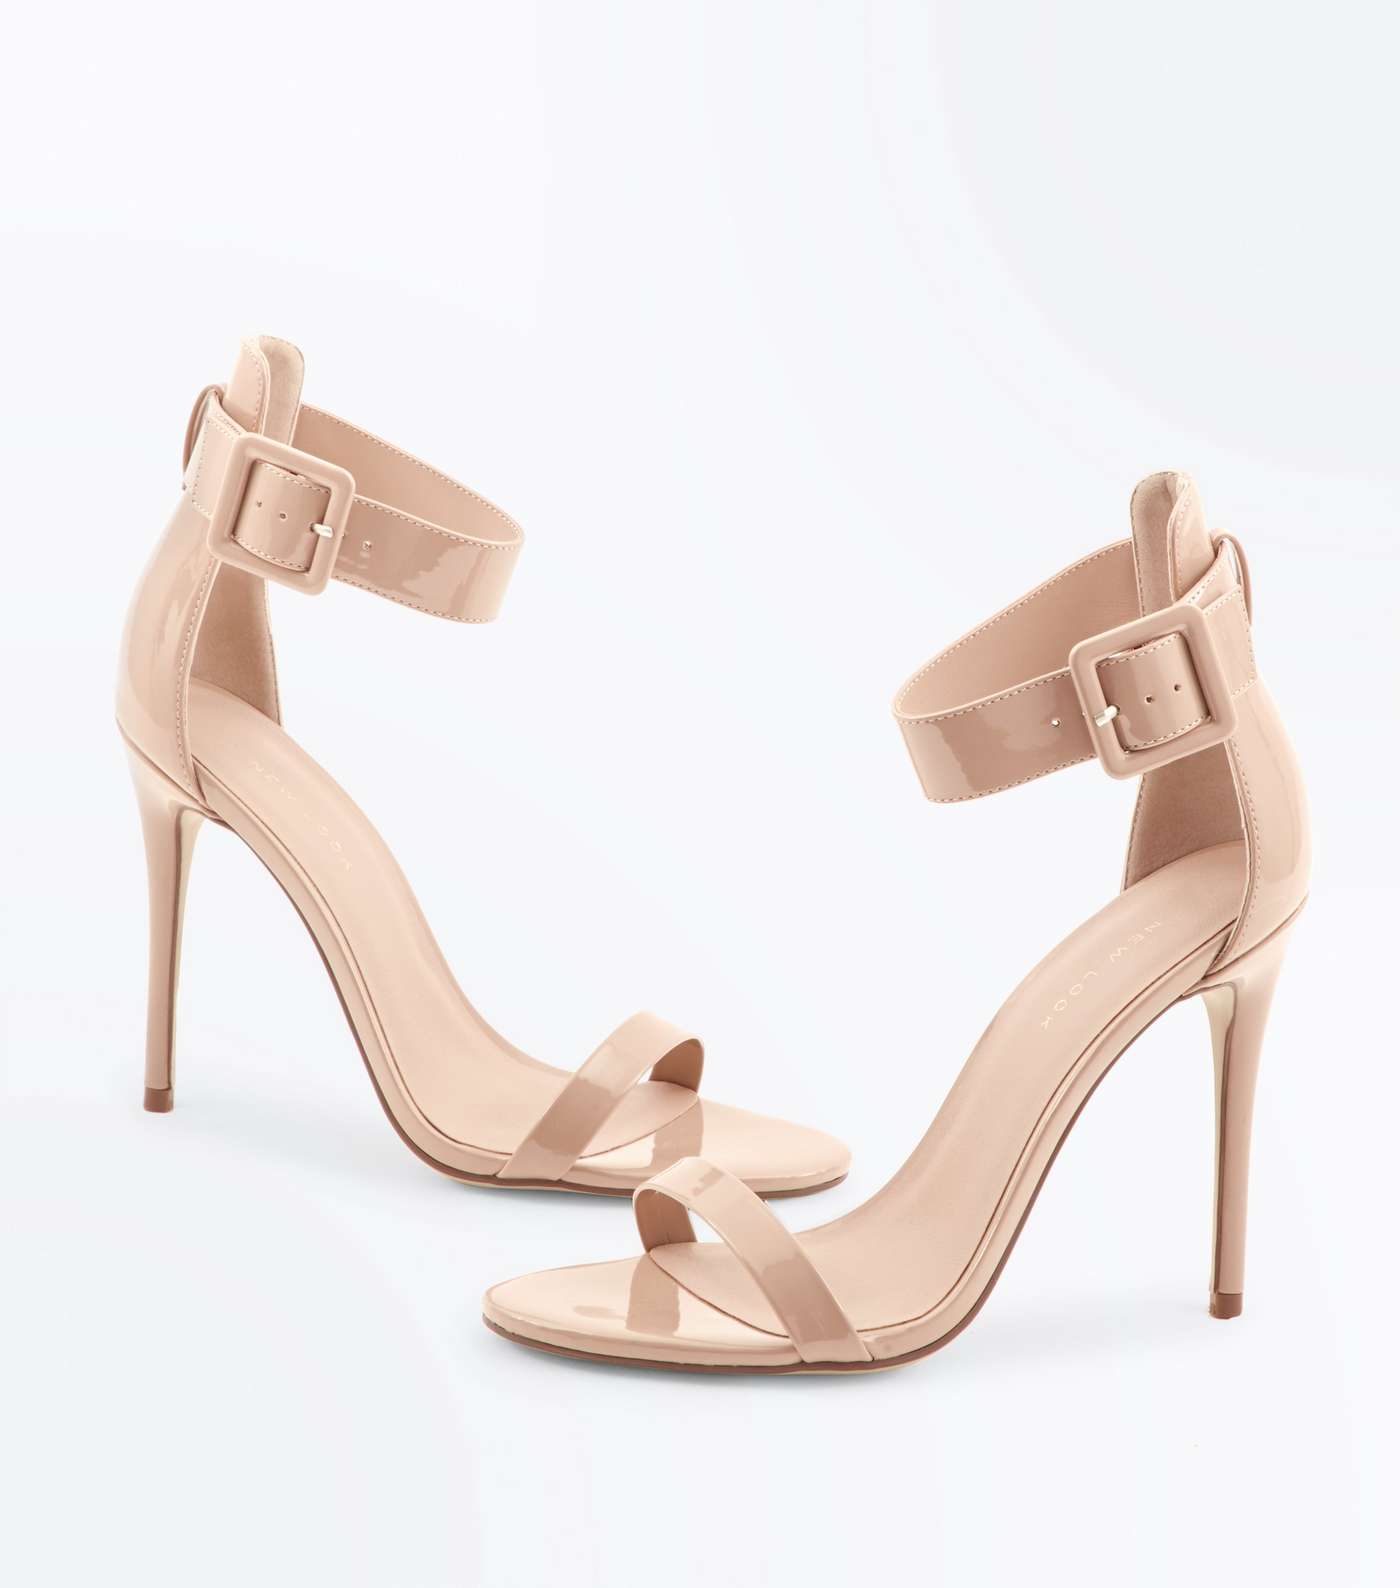 Nude Suedette Buckle Strap Barely There Heels Image 3